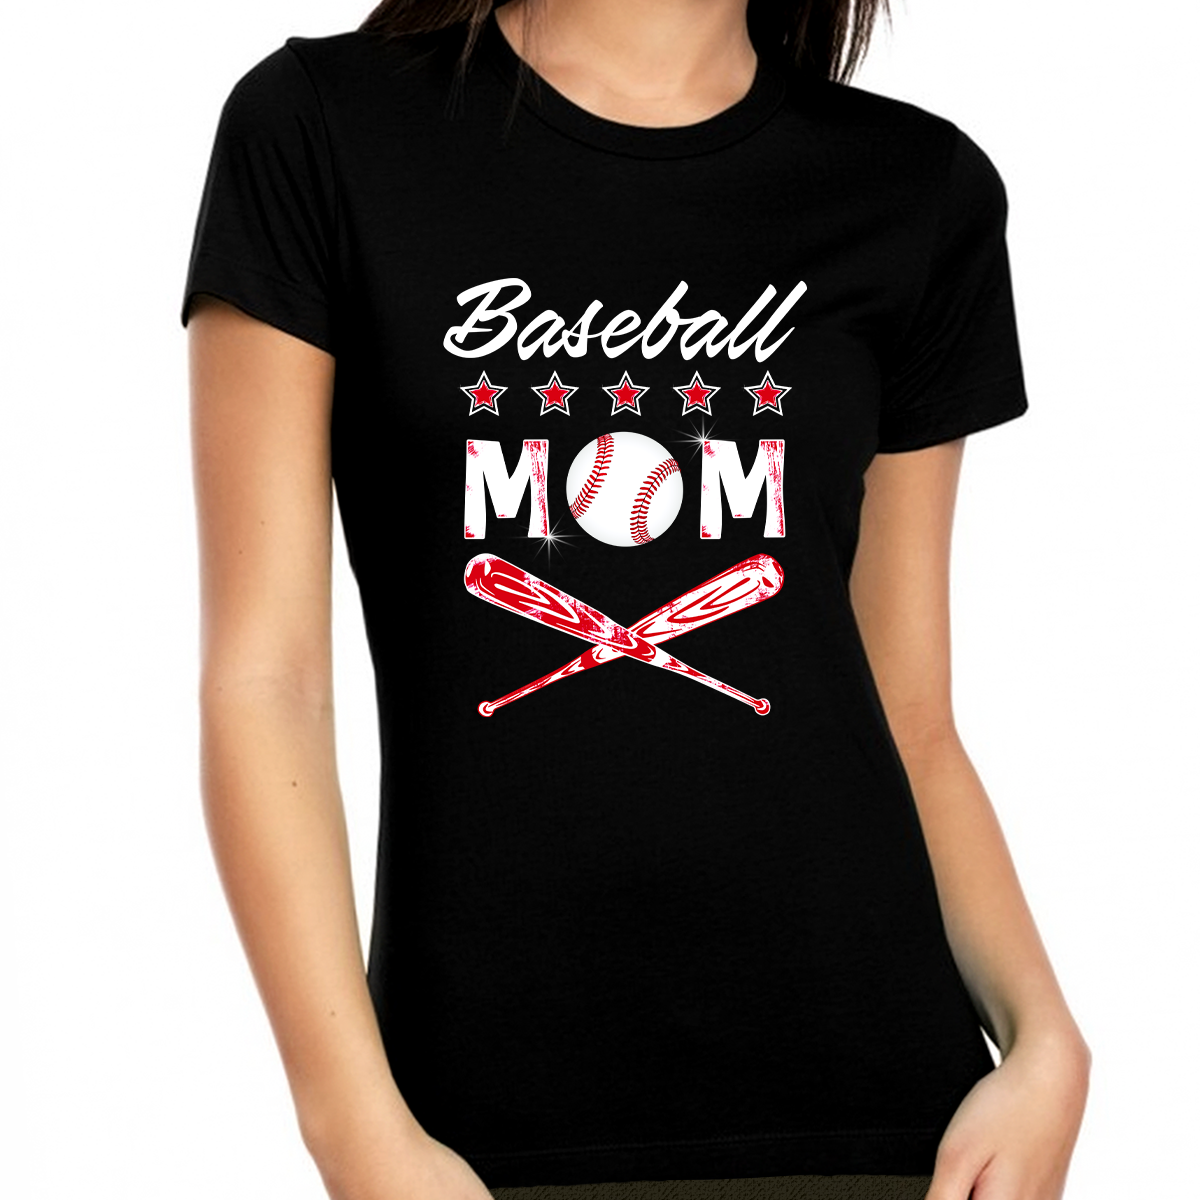 Baseball Mom Shirts for Women - Baseball Mom Shirt - Mothers Day Shirt -  Mothers Day Gift – Fire Fit Designs